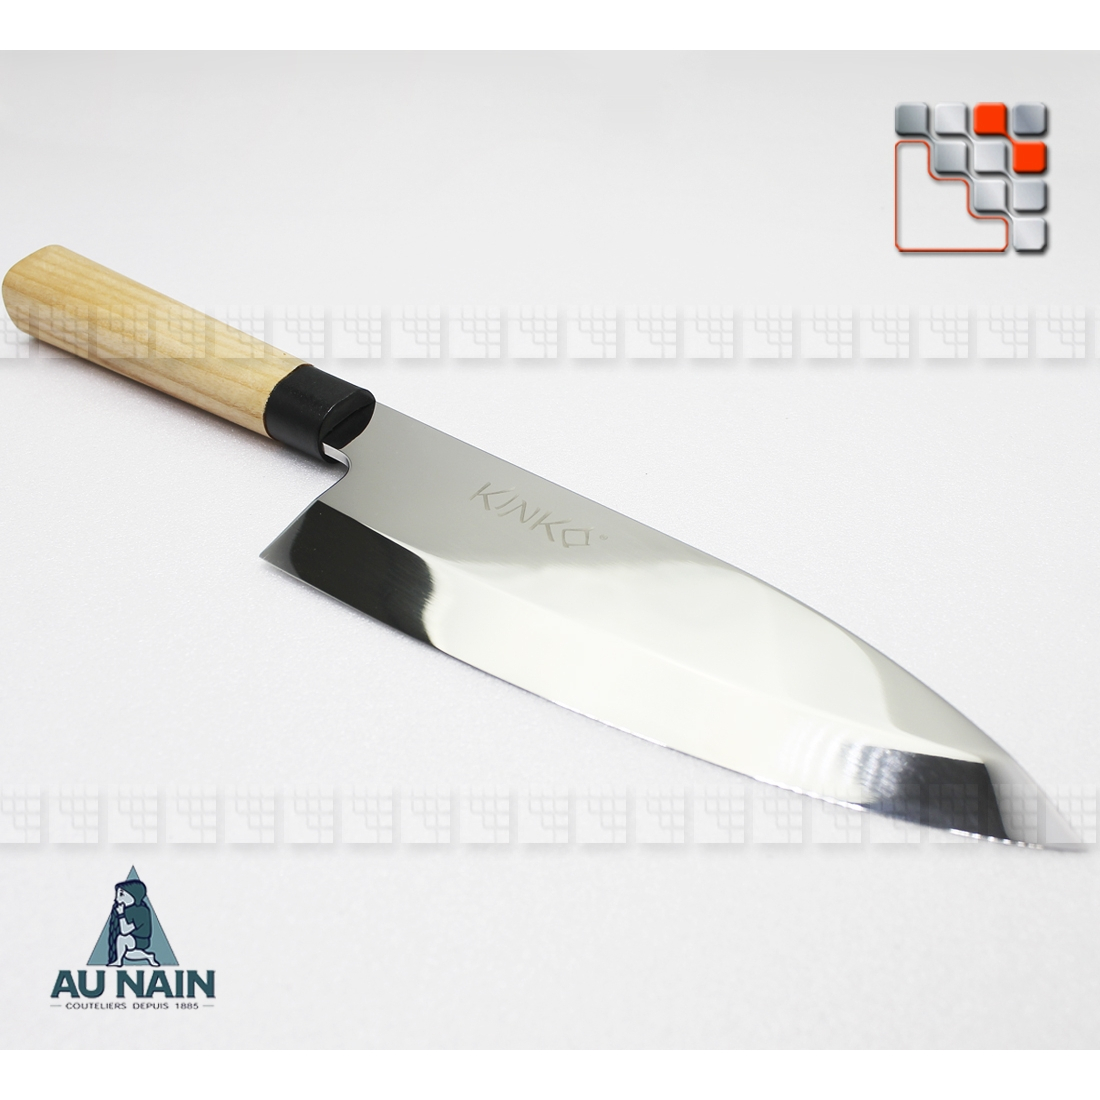 Japanese Chef's knife Deba KINKO (Left or right handed) A38-1290204 AU NAIN® Coutellerie & Cutting